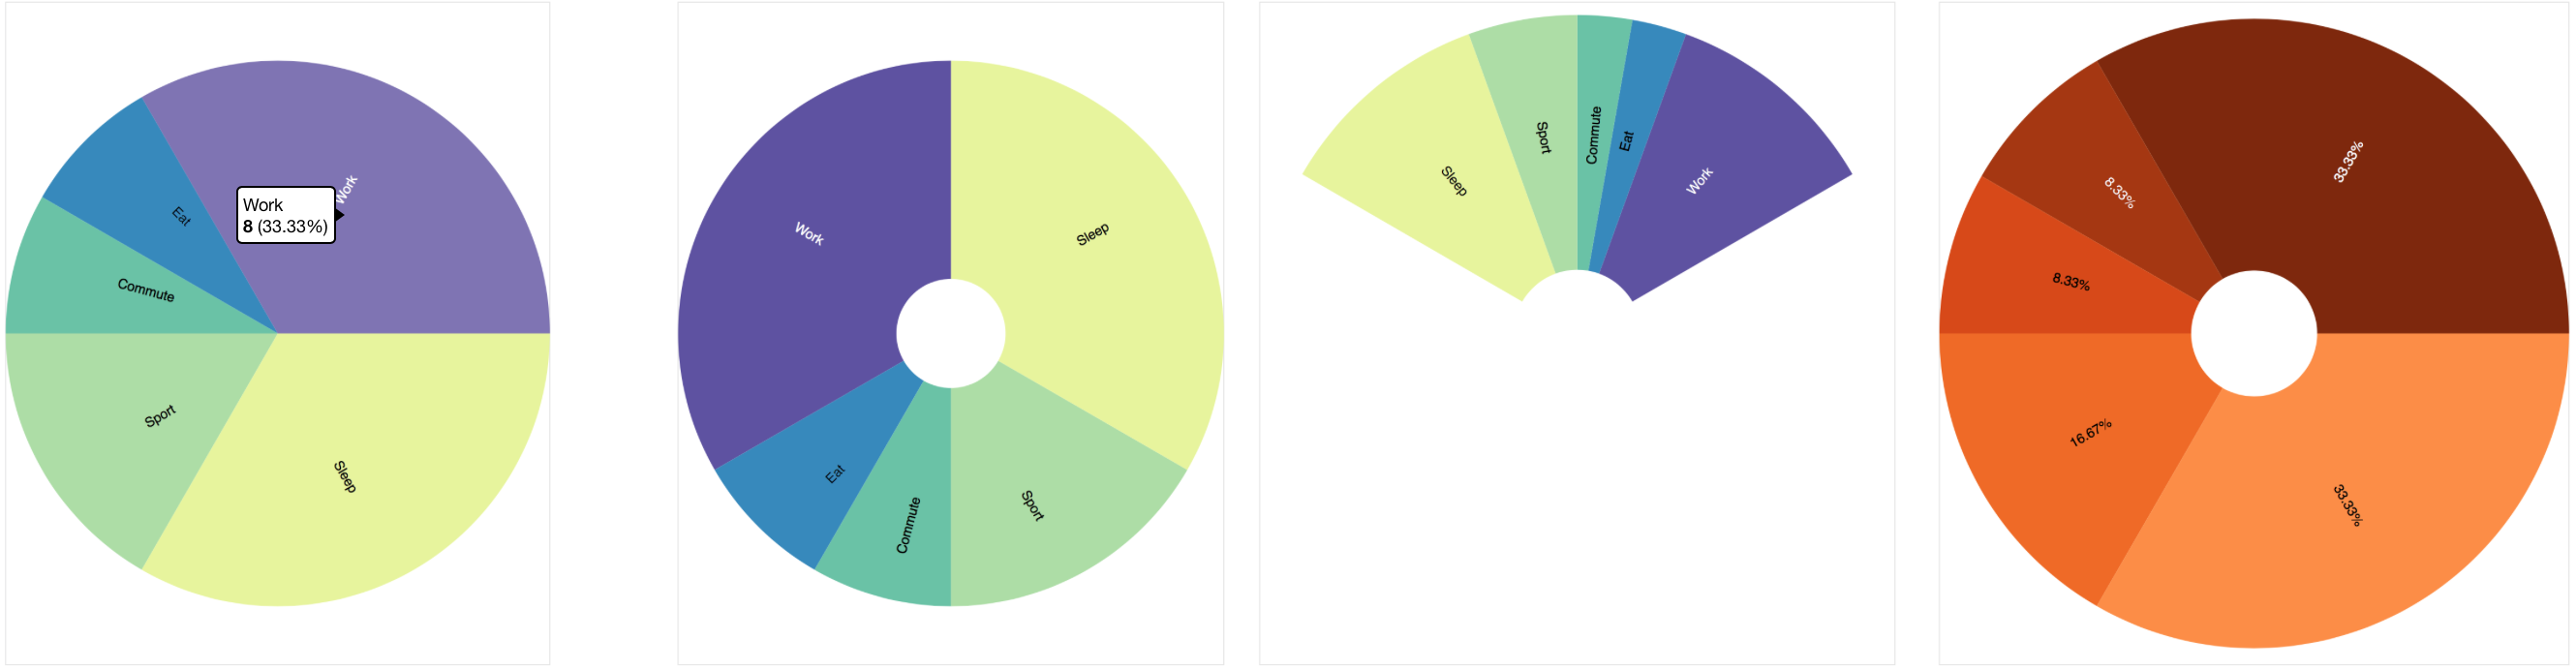 ../../_images/bokehjs_pie_charts.png